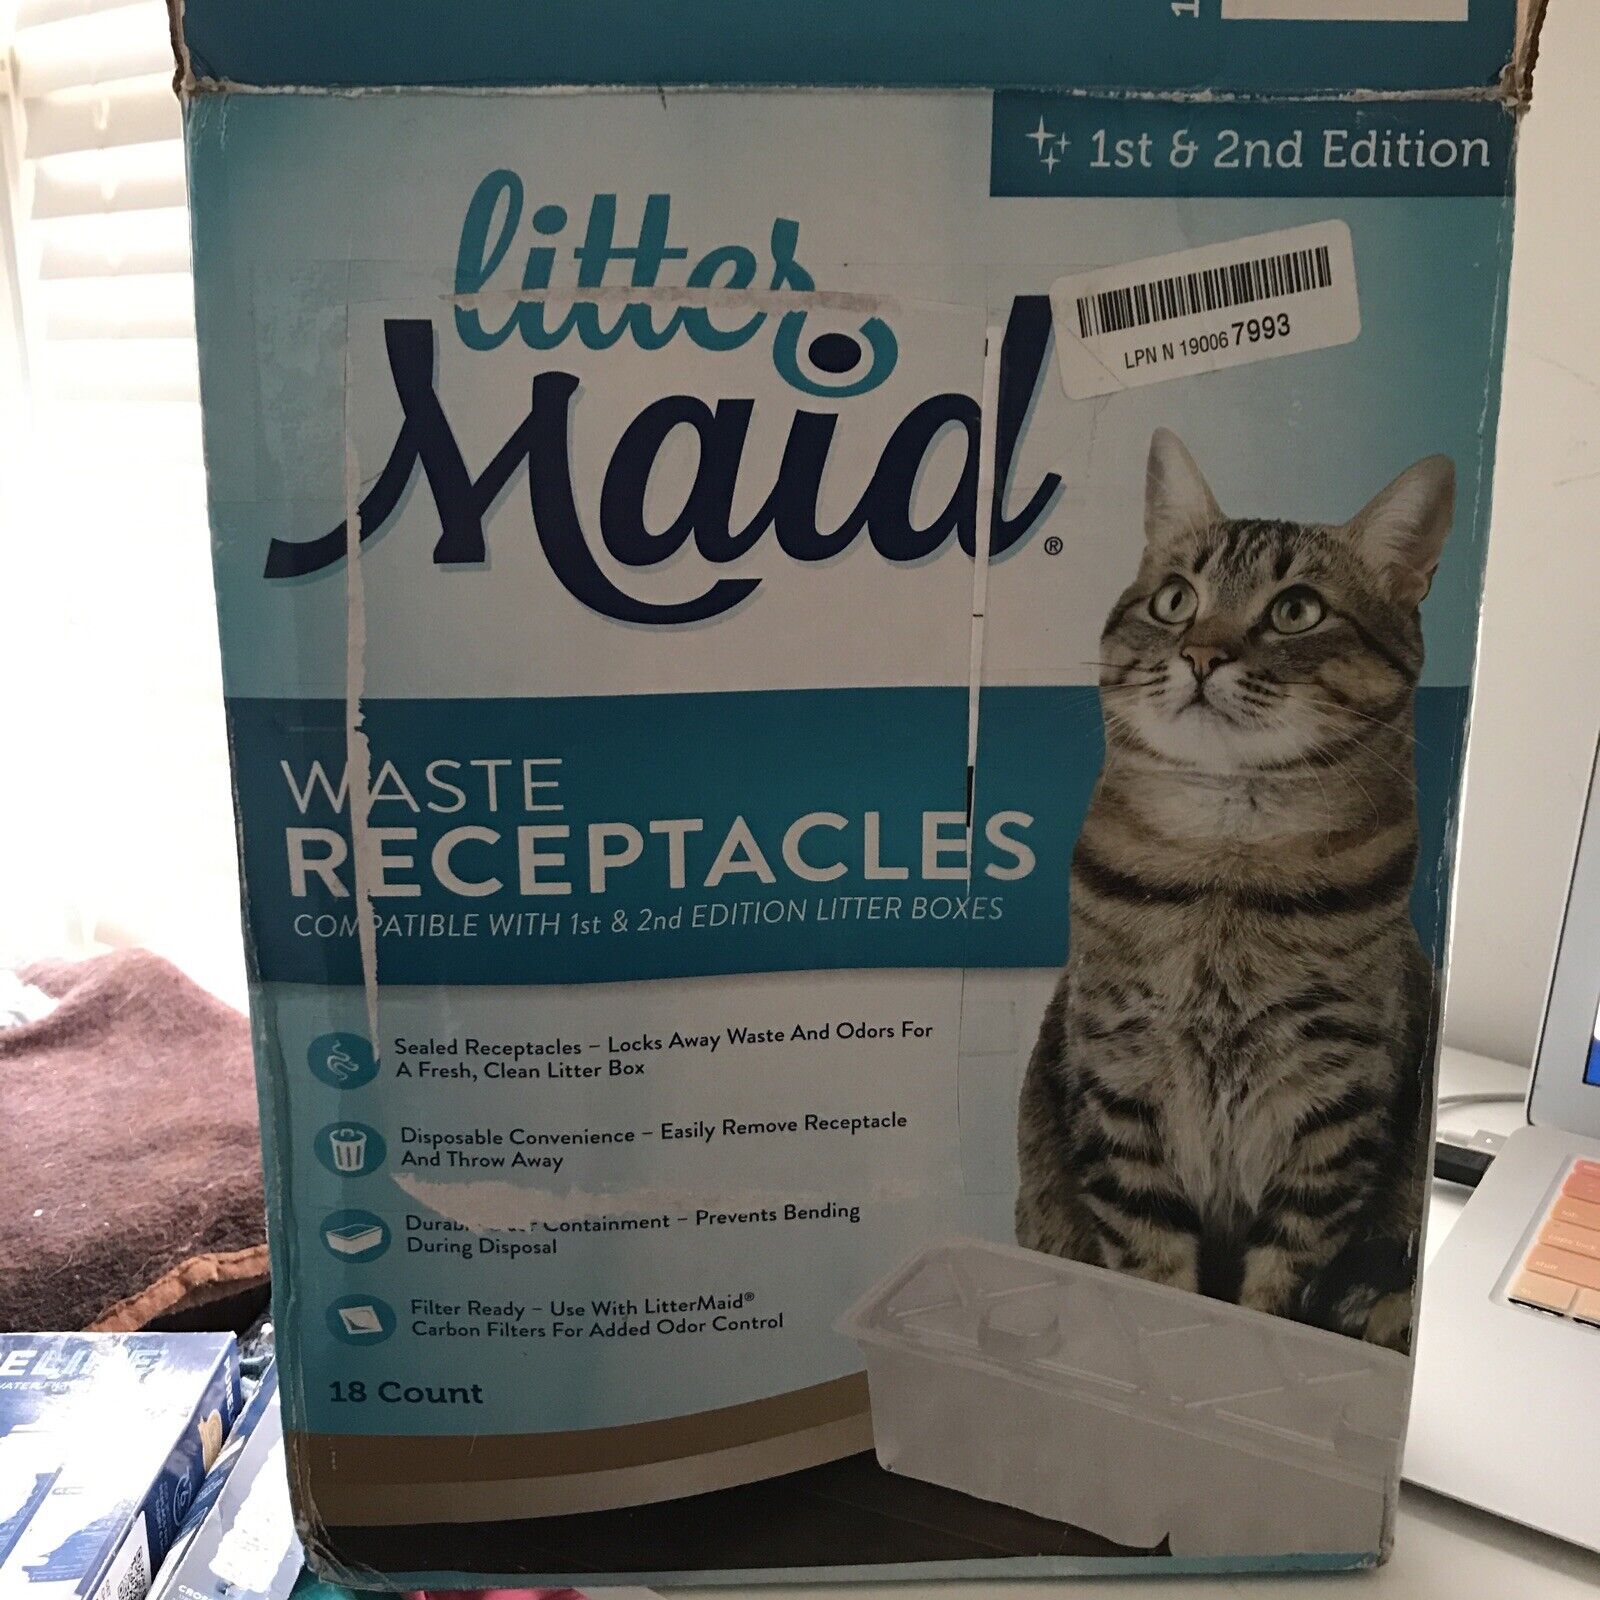 NIB LITTER MAID Waste Receptacles 1st & 2nd Edition 18 Count For Cat Litter